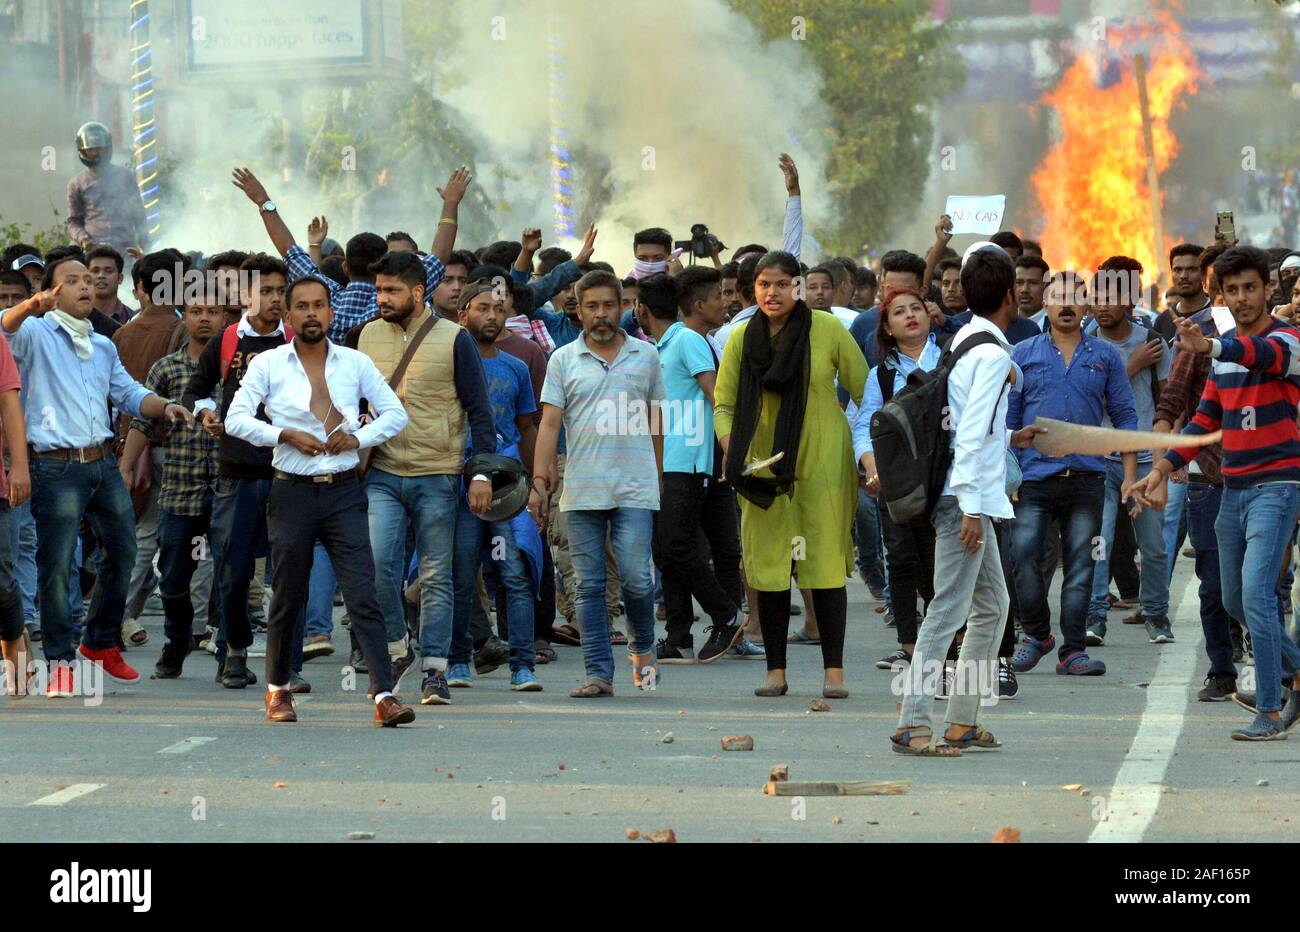 Guwahati, India. 11th Dec, 2019. Protestors demonstrate against the Citizenship Amendment Bill (CAB) in Guwahati, India, Dec. 11, 2019. The upper house of Indian parliament, or Rajya Sabha, passed the controversial Citizenship Amendment Bill (CAB) Wednesday evening, officials said. Credit: Str/Xinhua/Alamy Live News Stock Photo